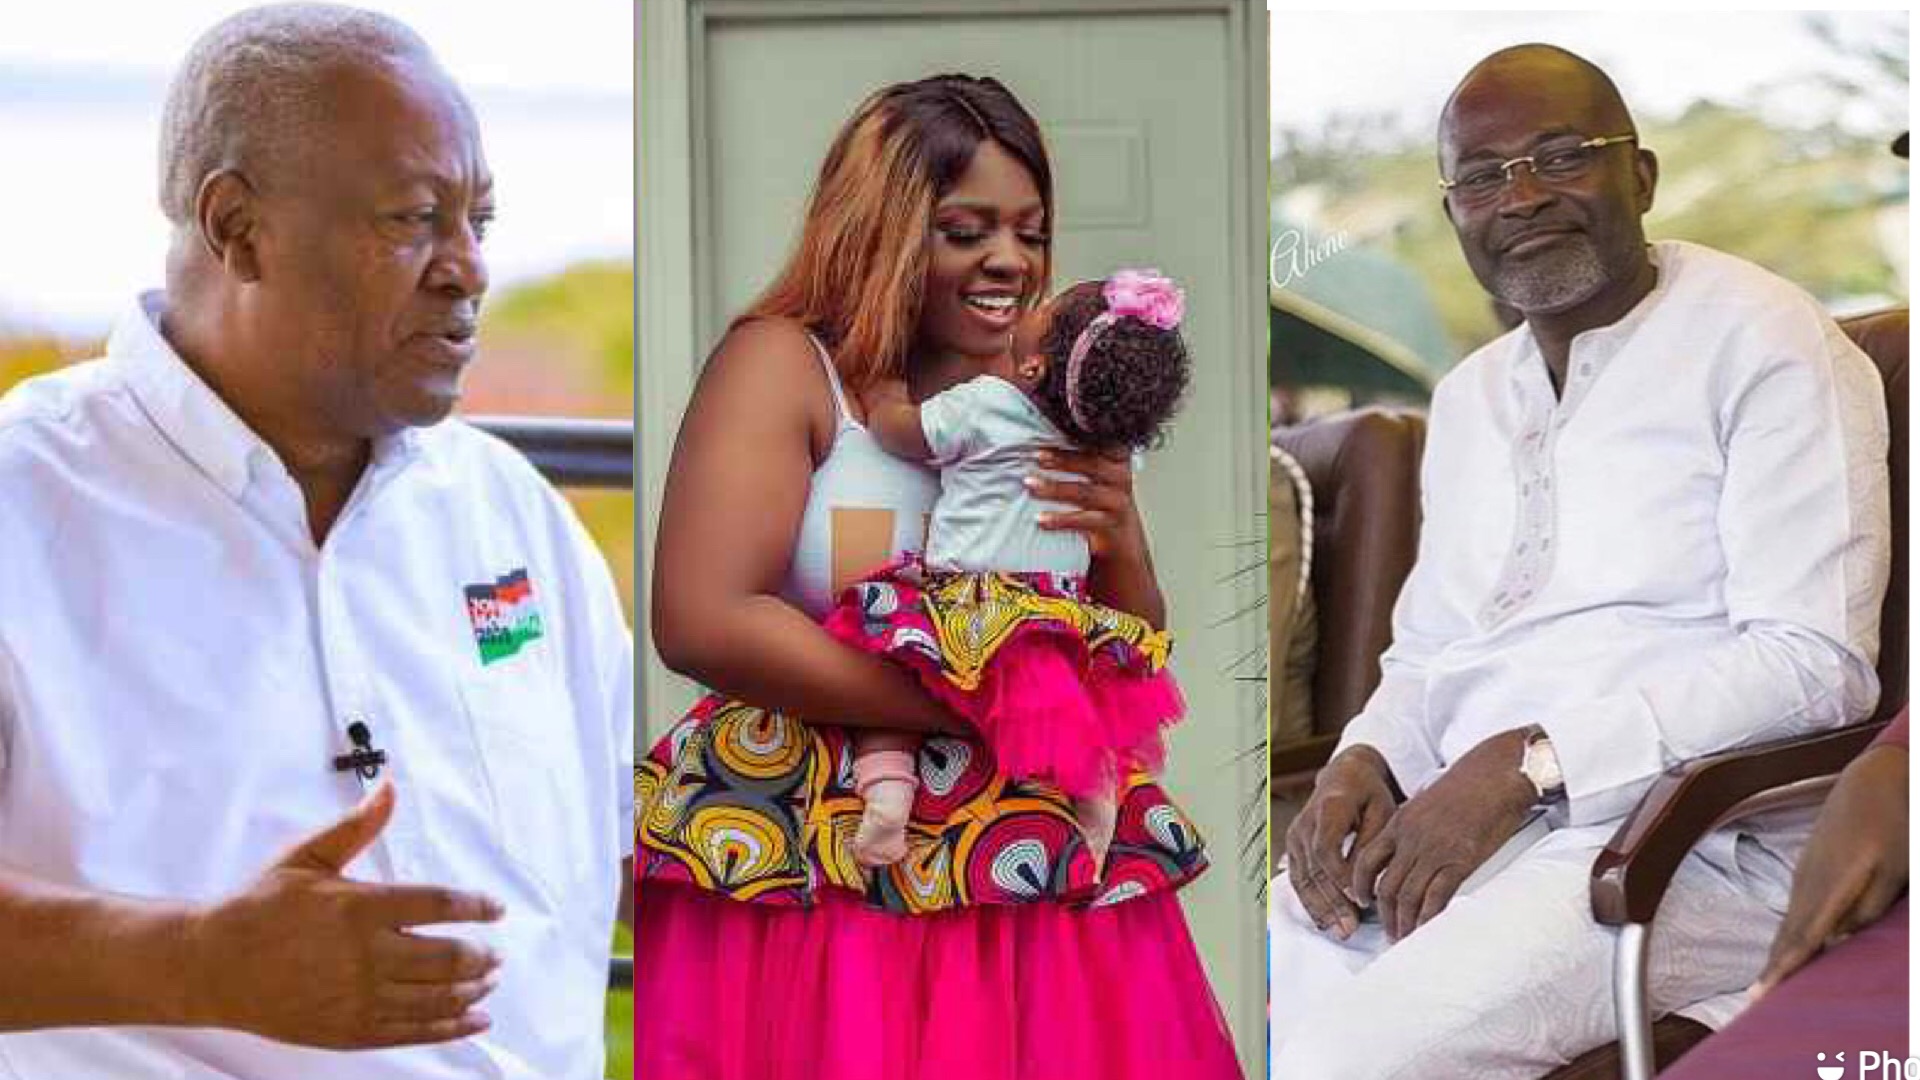 ‘Cheap Celebrity’, is this how you repay ‘Papa No’ John Mahama? – Kennedy Agyapong